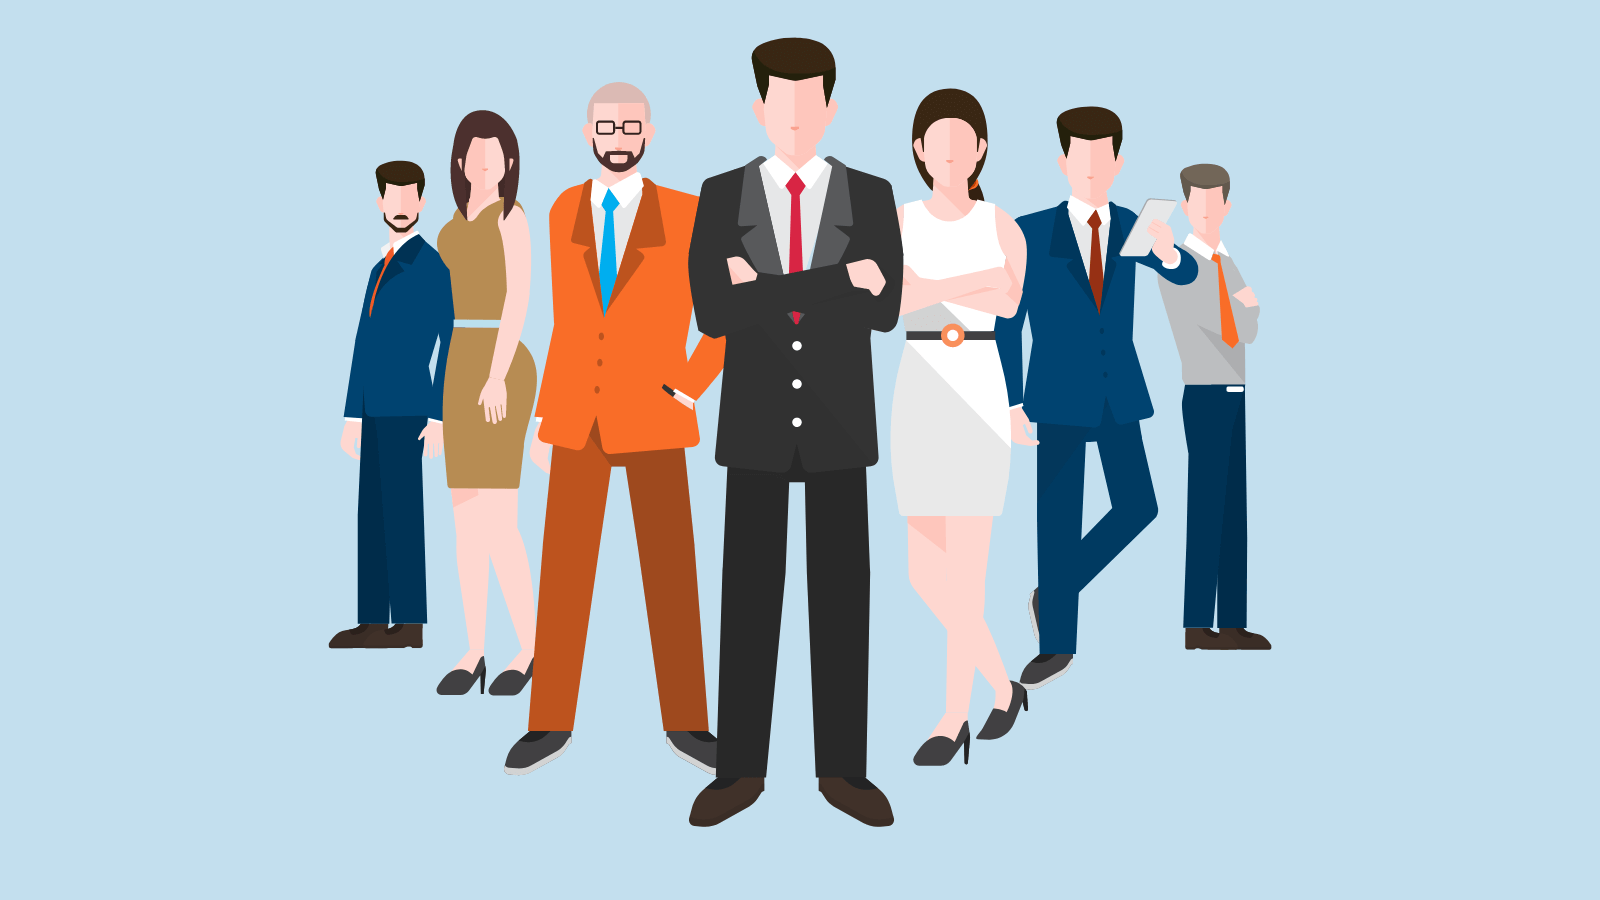 Seven people in business attire standing in a V formation